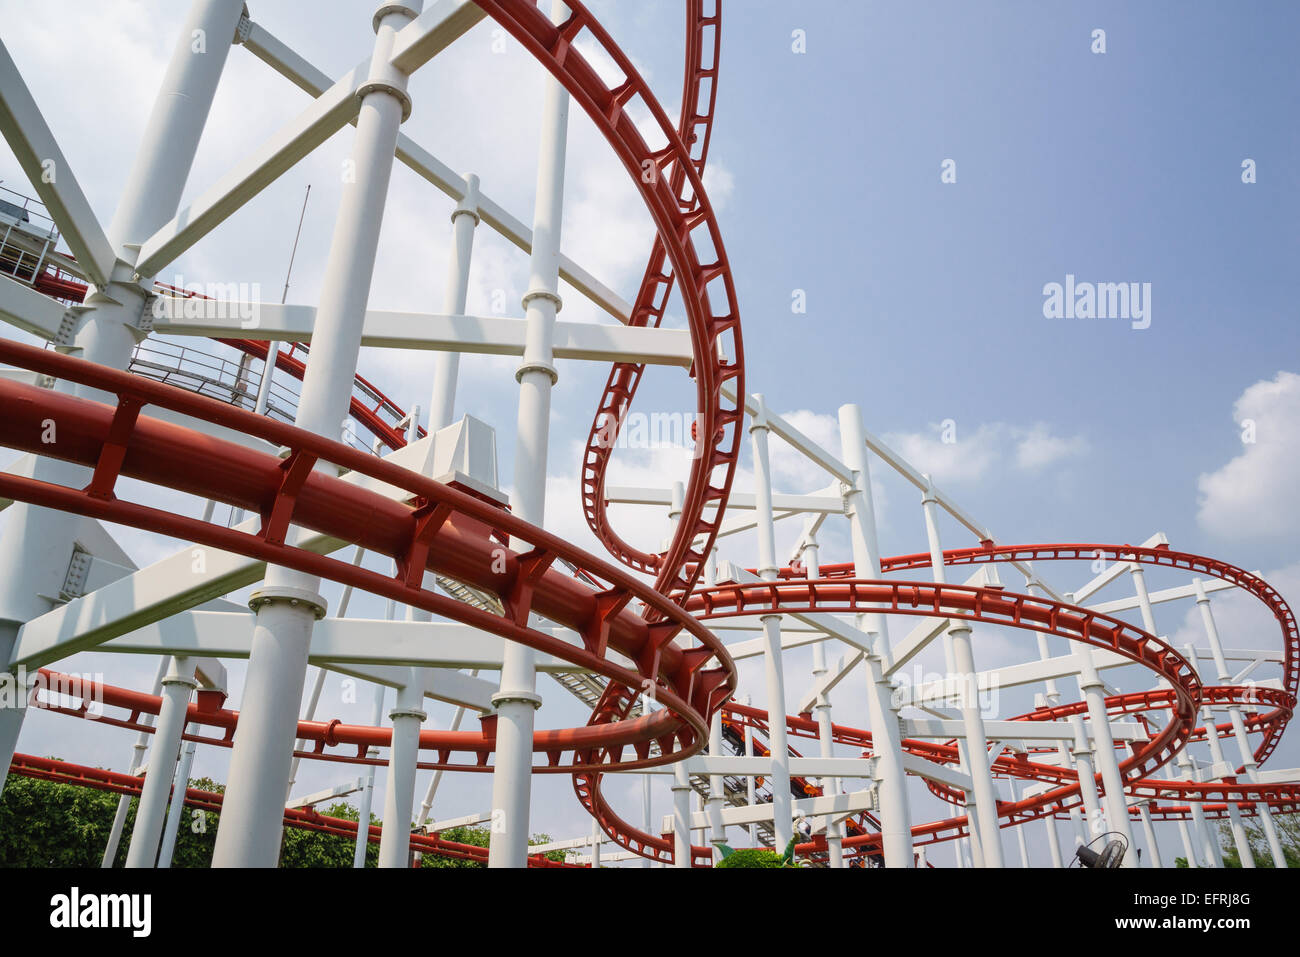 round turn of red roller coaster rail in amusement park look exiting and fun for all visitors to play Stock Photo